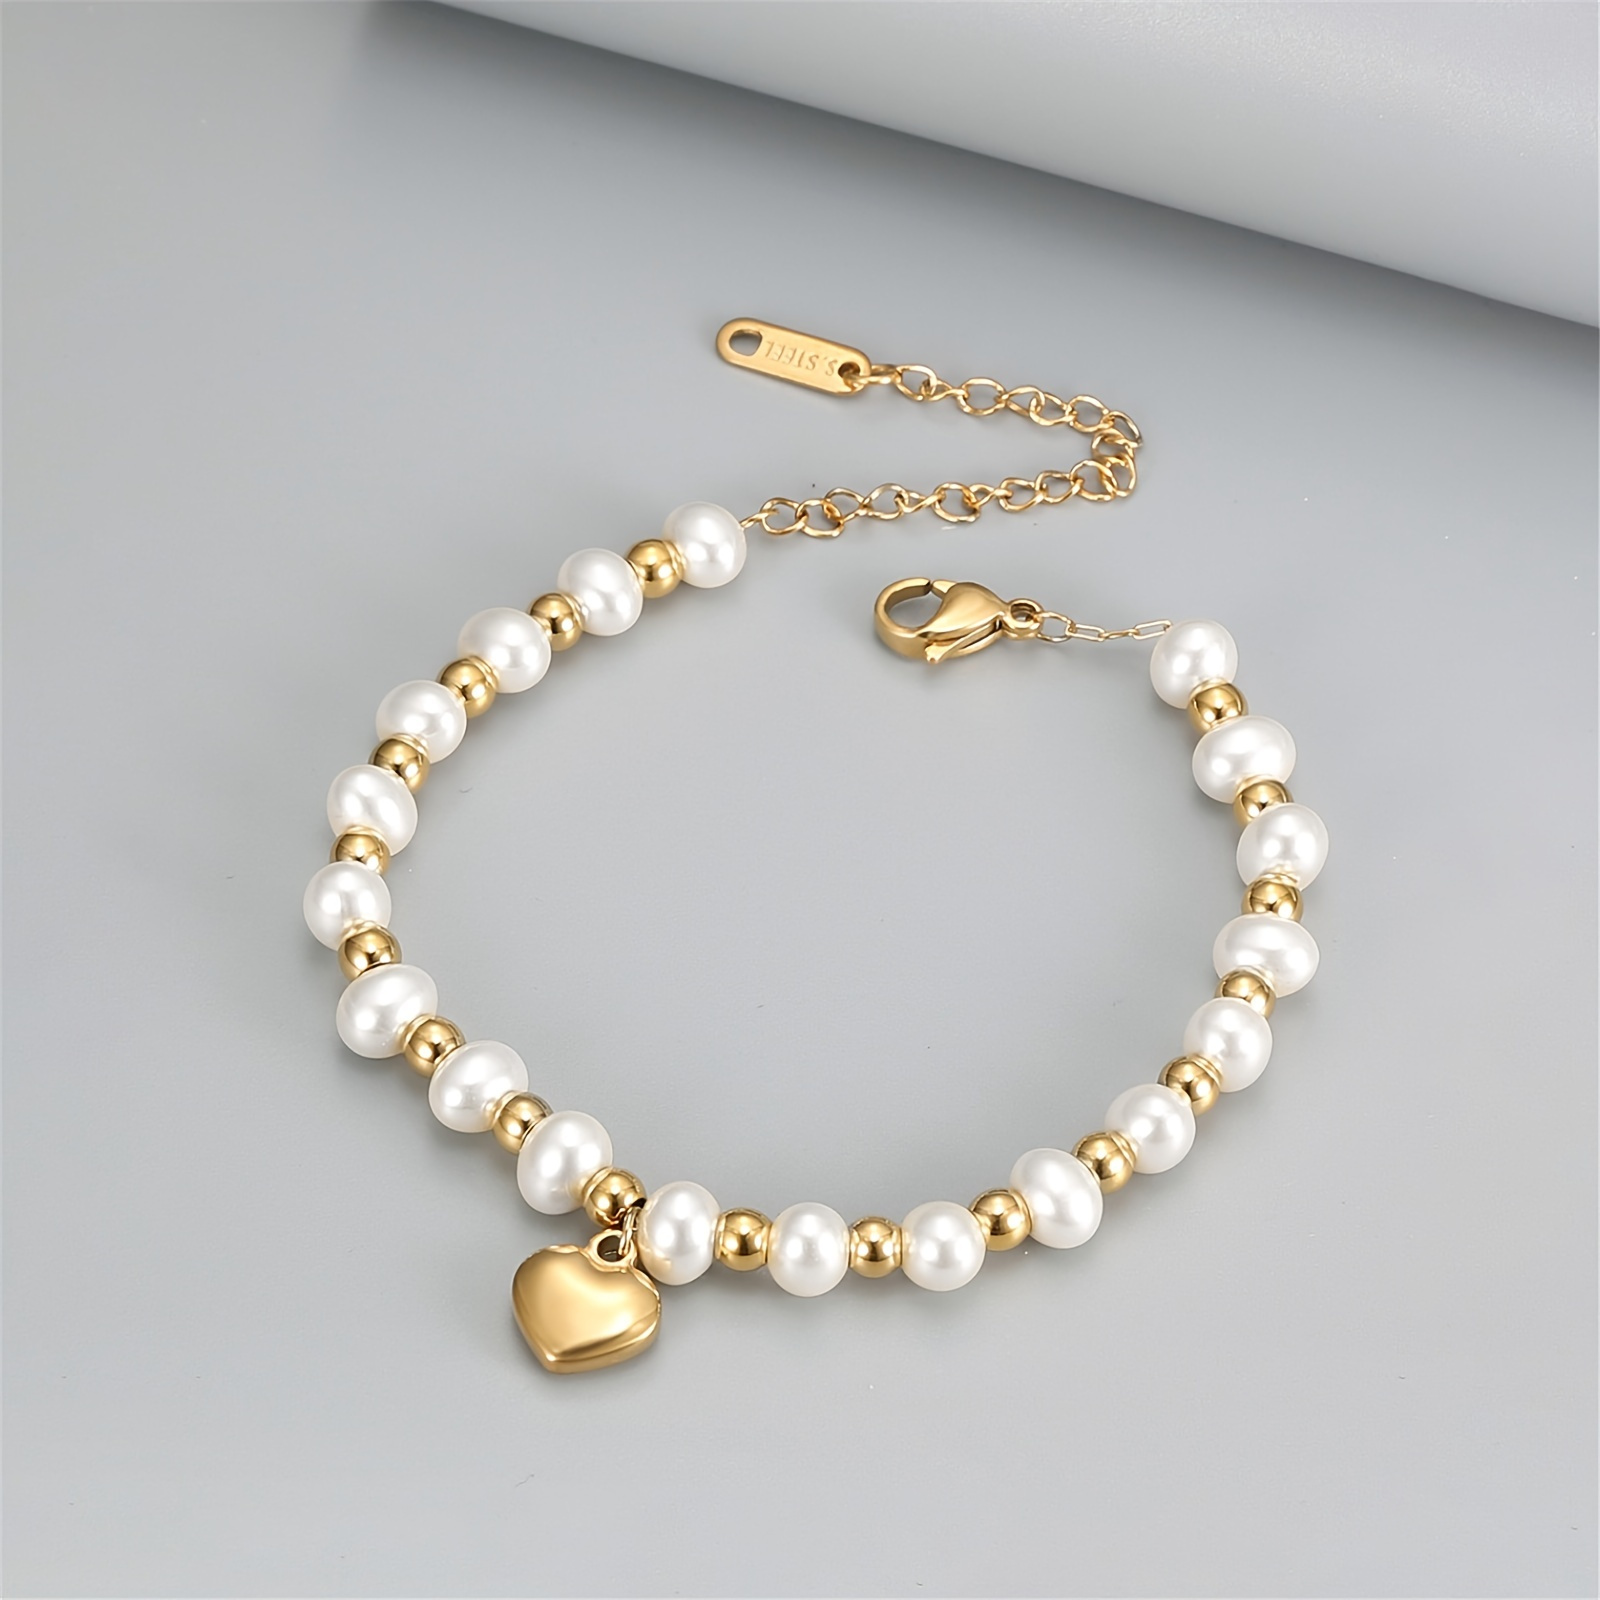 

Heart Shape Pendant Bracelet With Faux Pearls Beads Stainless Steel Hand Jewelry Minimalist Valentines Day Jewelry Gift